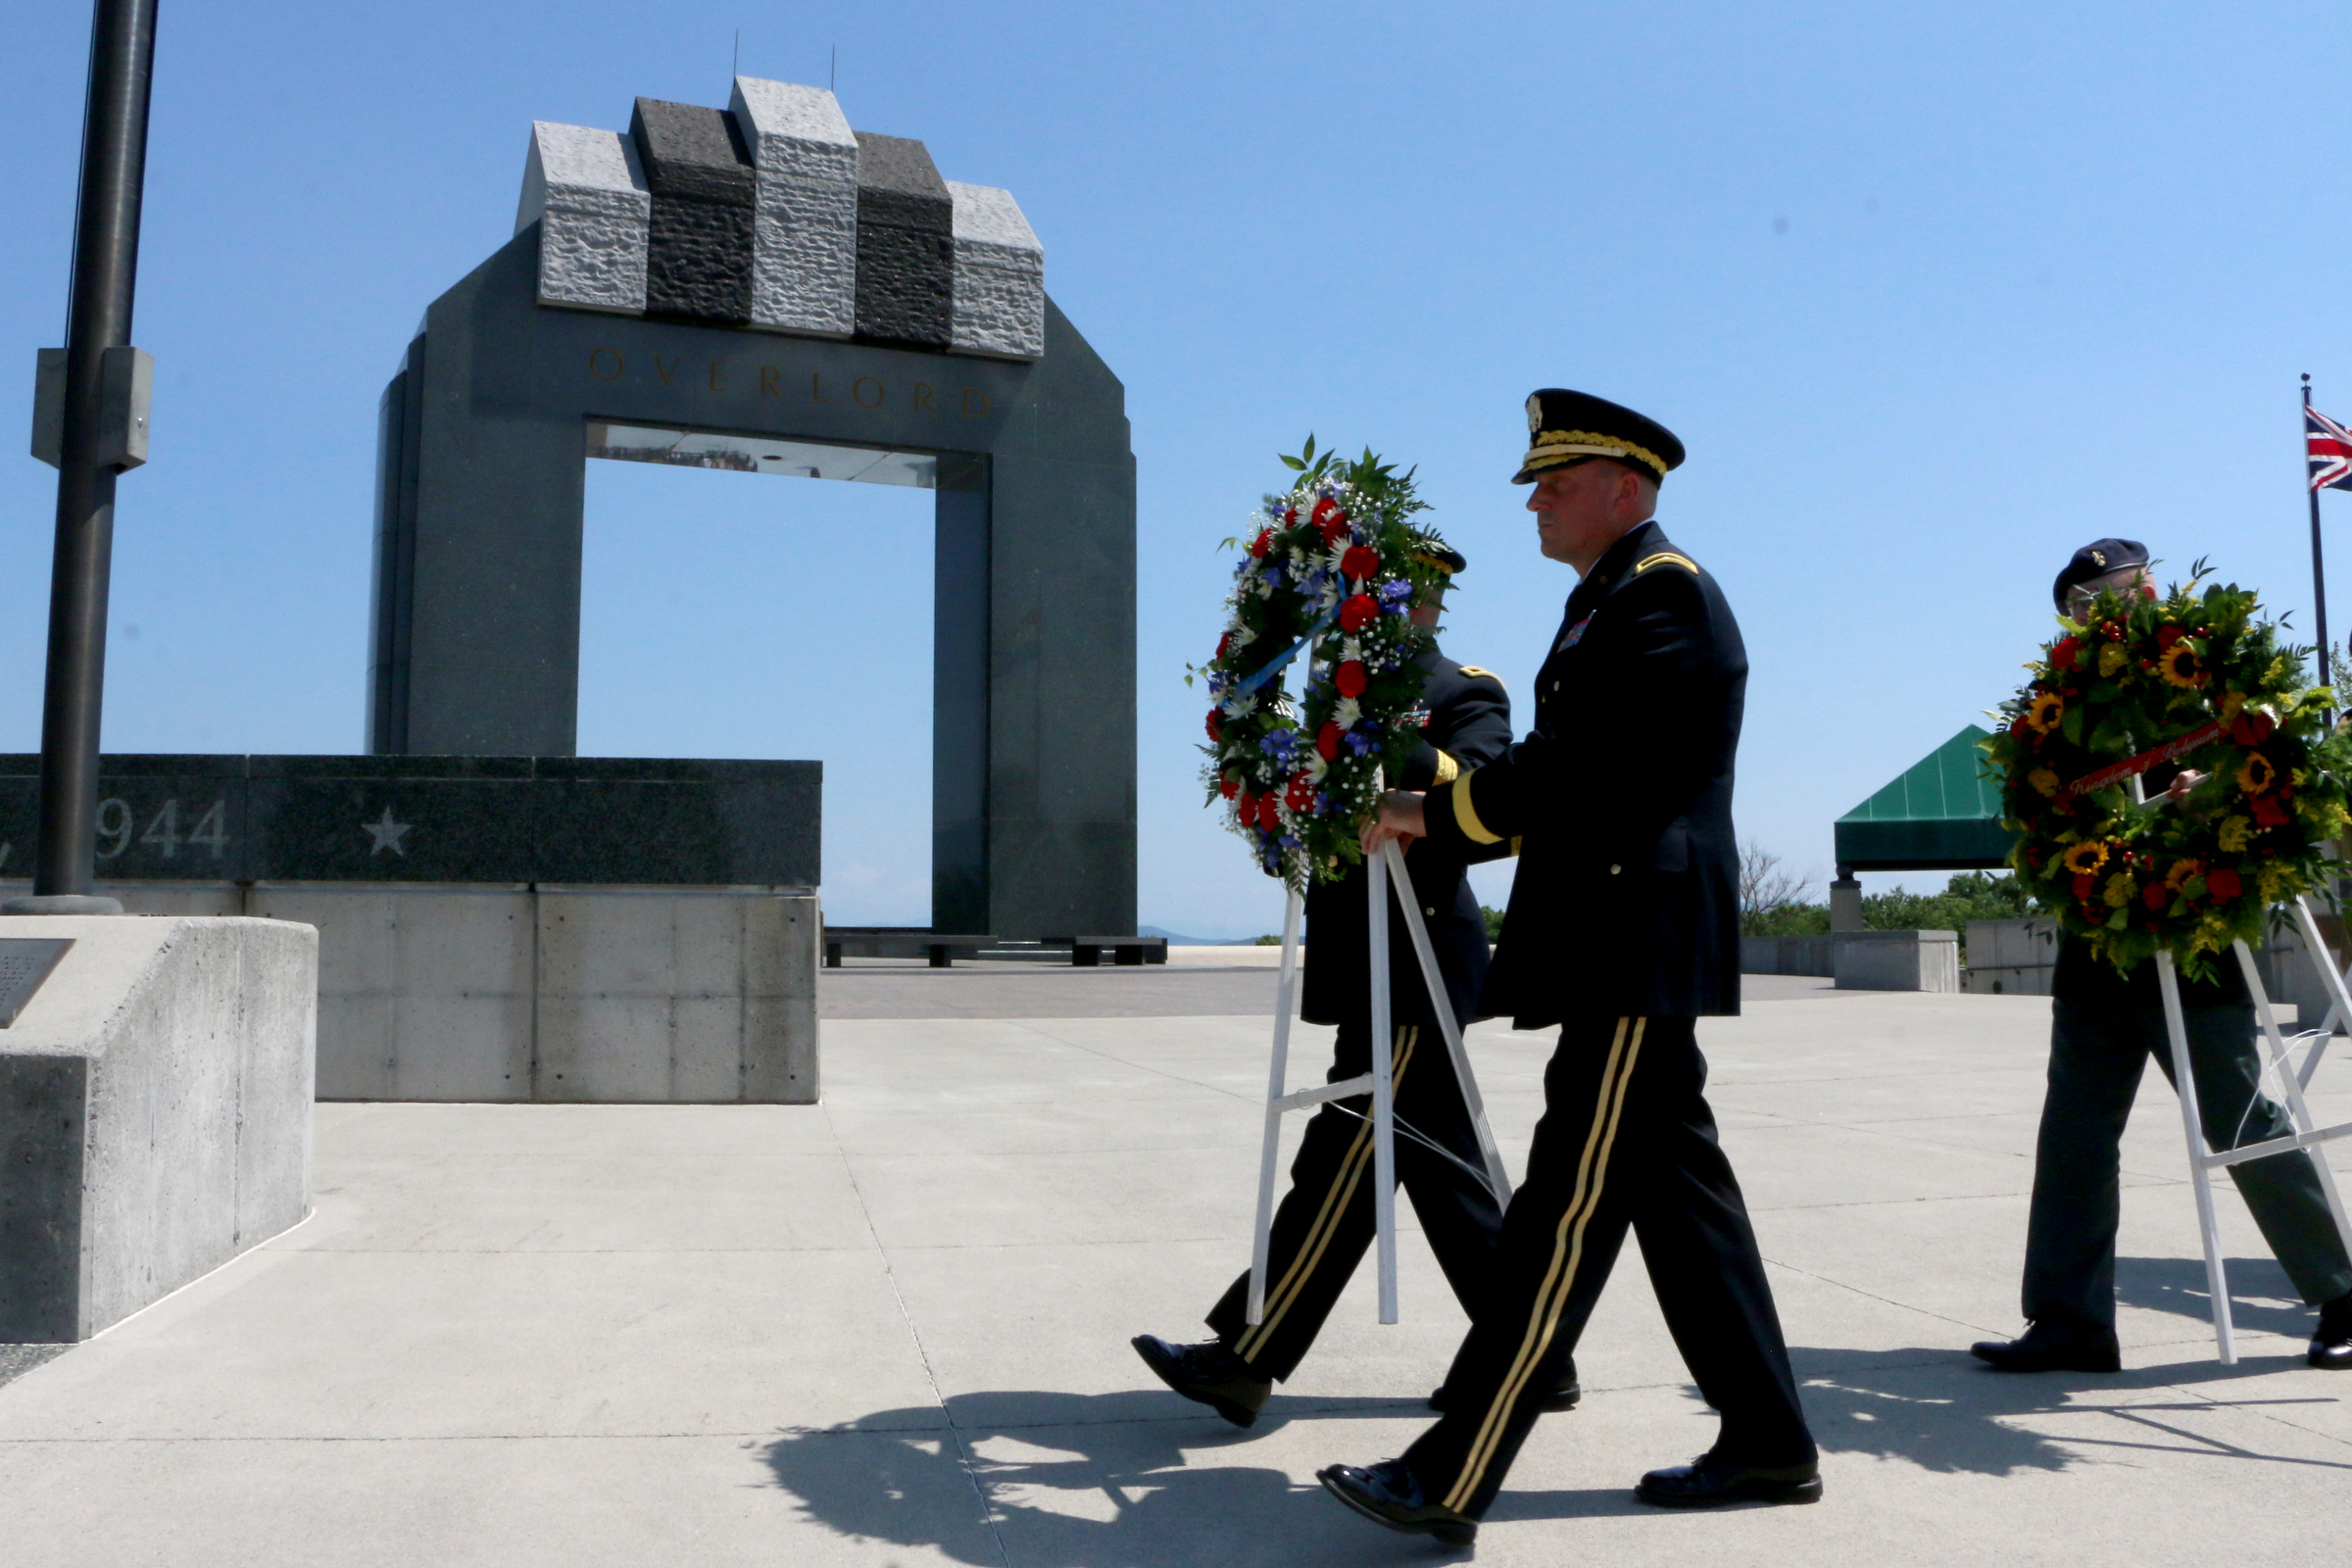 Senior Virginia National Guard leaders present a wreath honoring the United States of America along with other Allied countries who took part in the D-D-Day invasion at the observance of the 71st anniversary of the Allied invasion of Normandy, France, June 6, 2015, at the National D-Day Memorial in Bedford, Virginia.